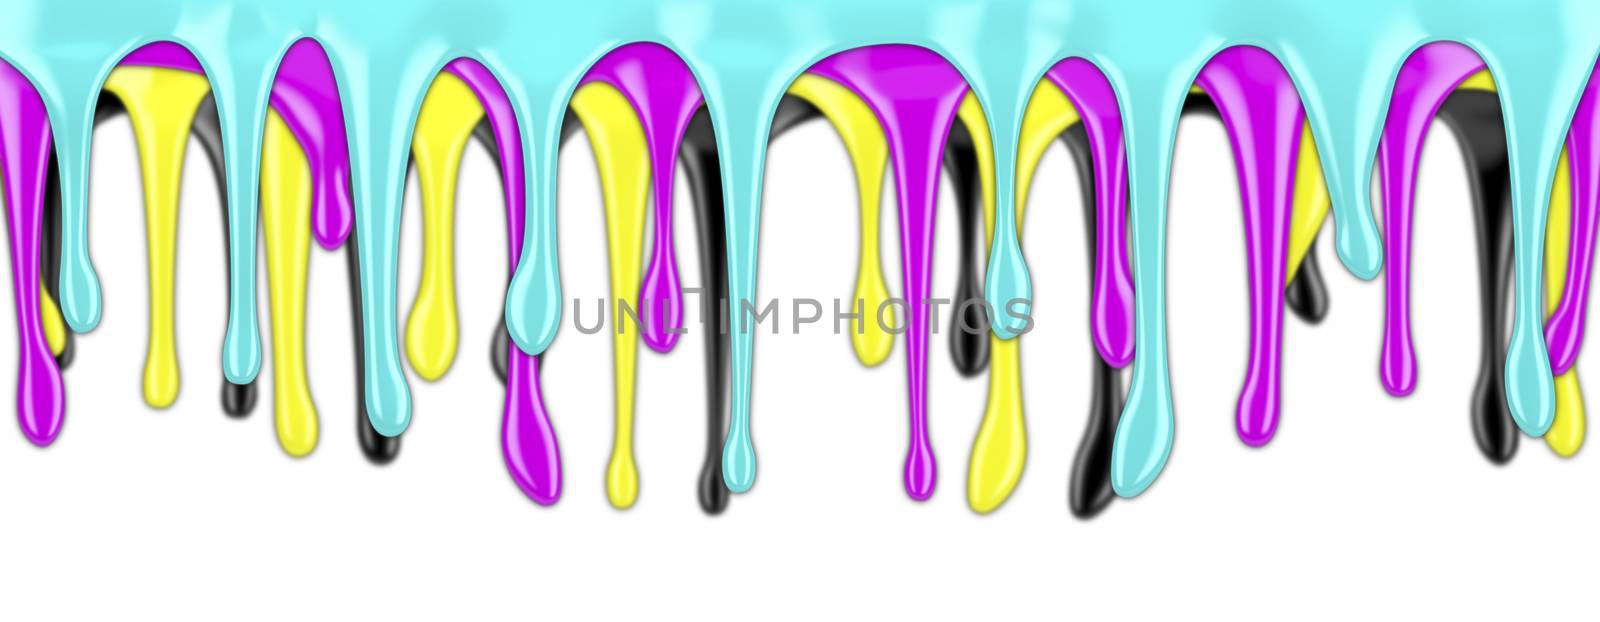 CMYK paint dripping on white background